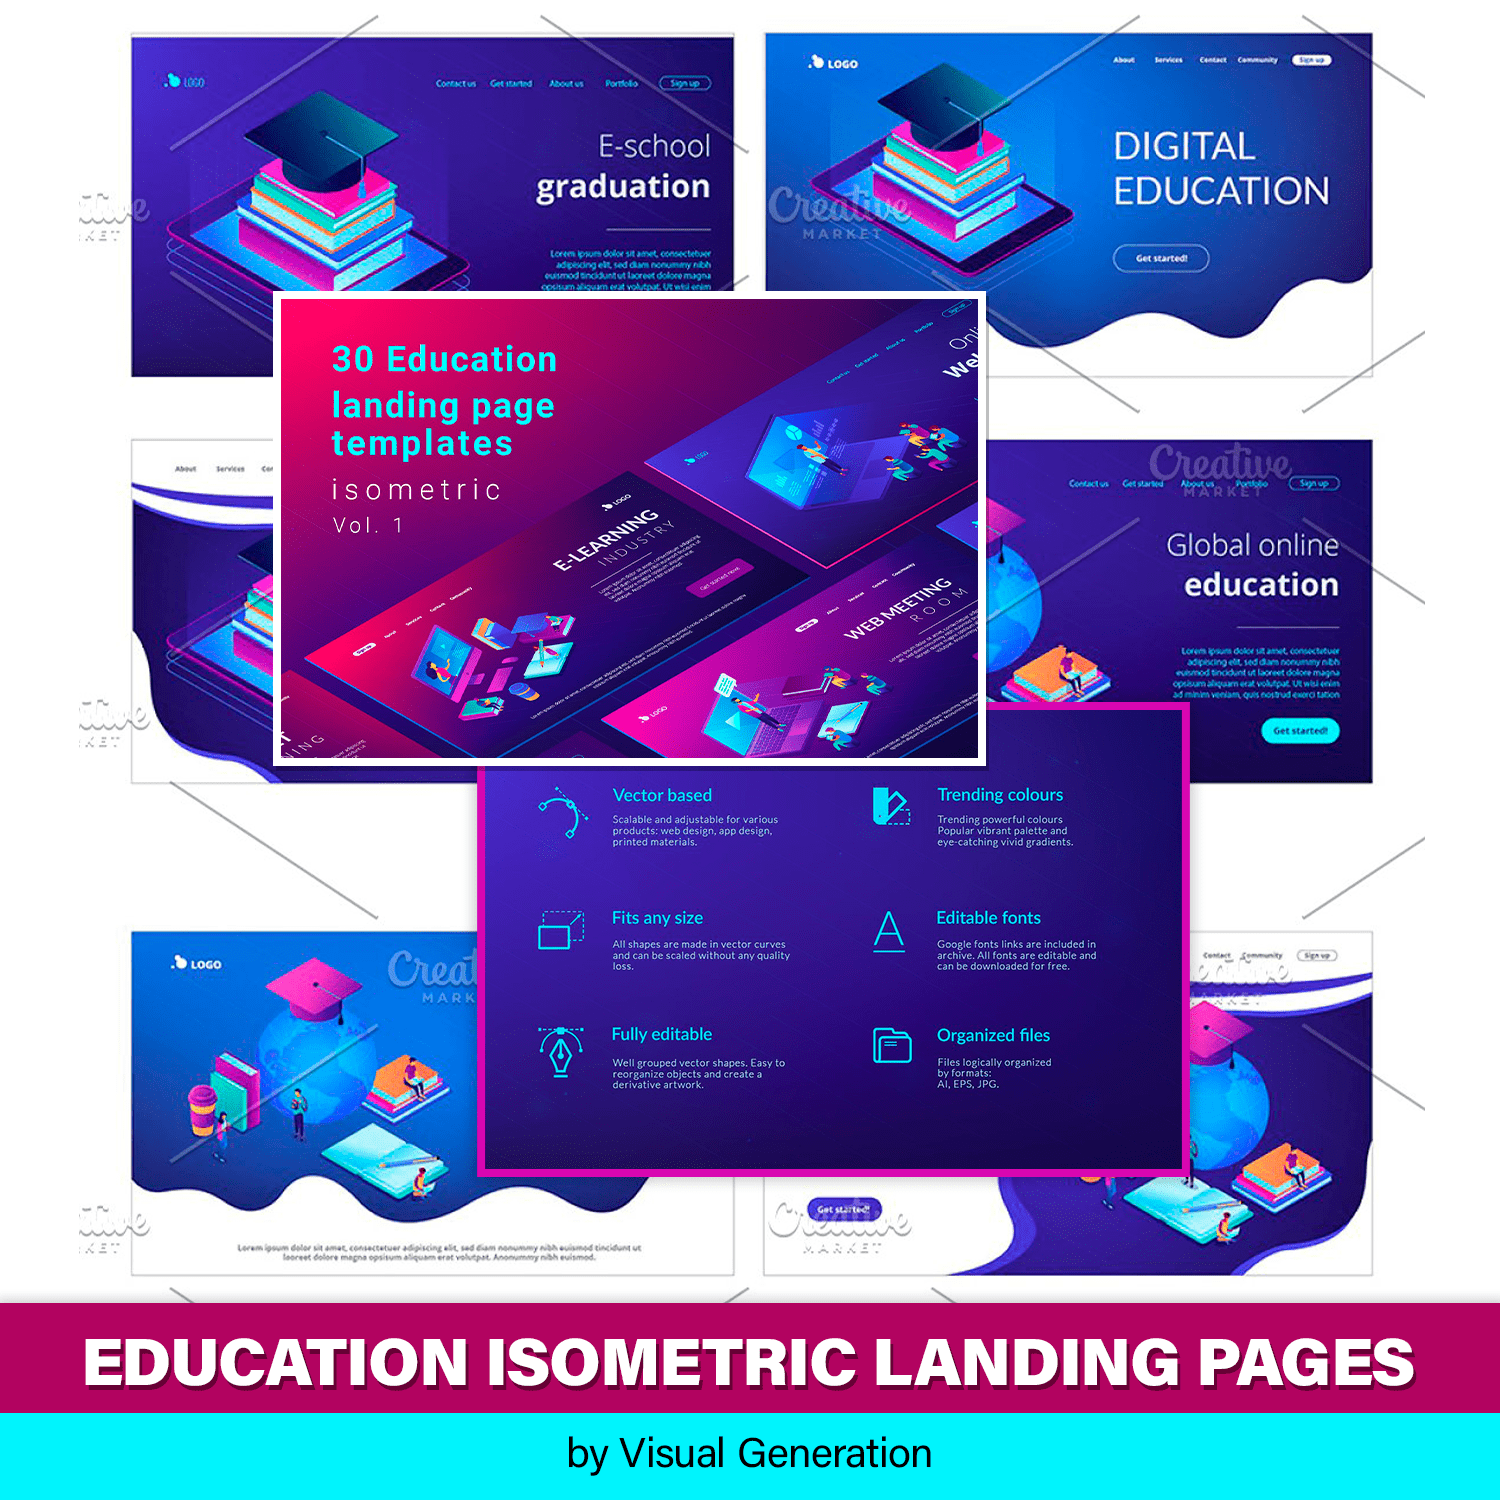 Education isometric landing pages cover.